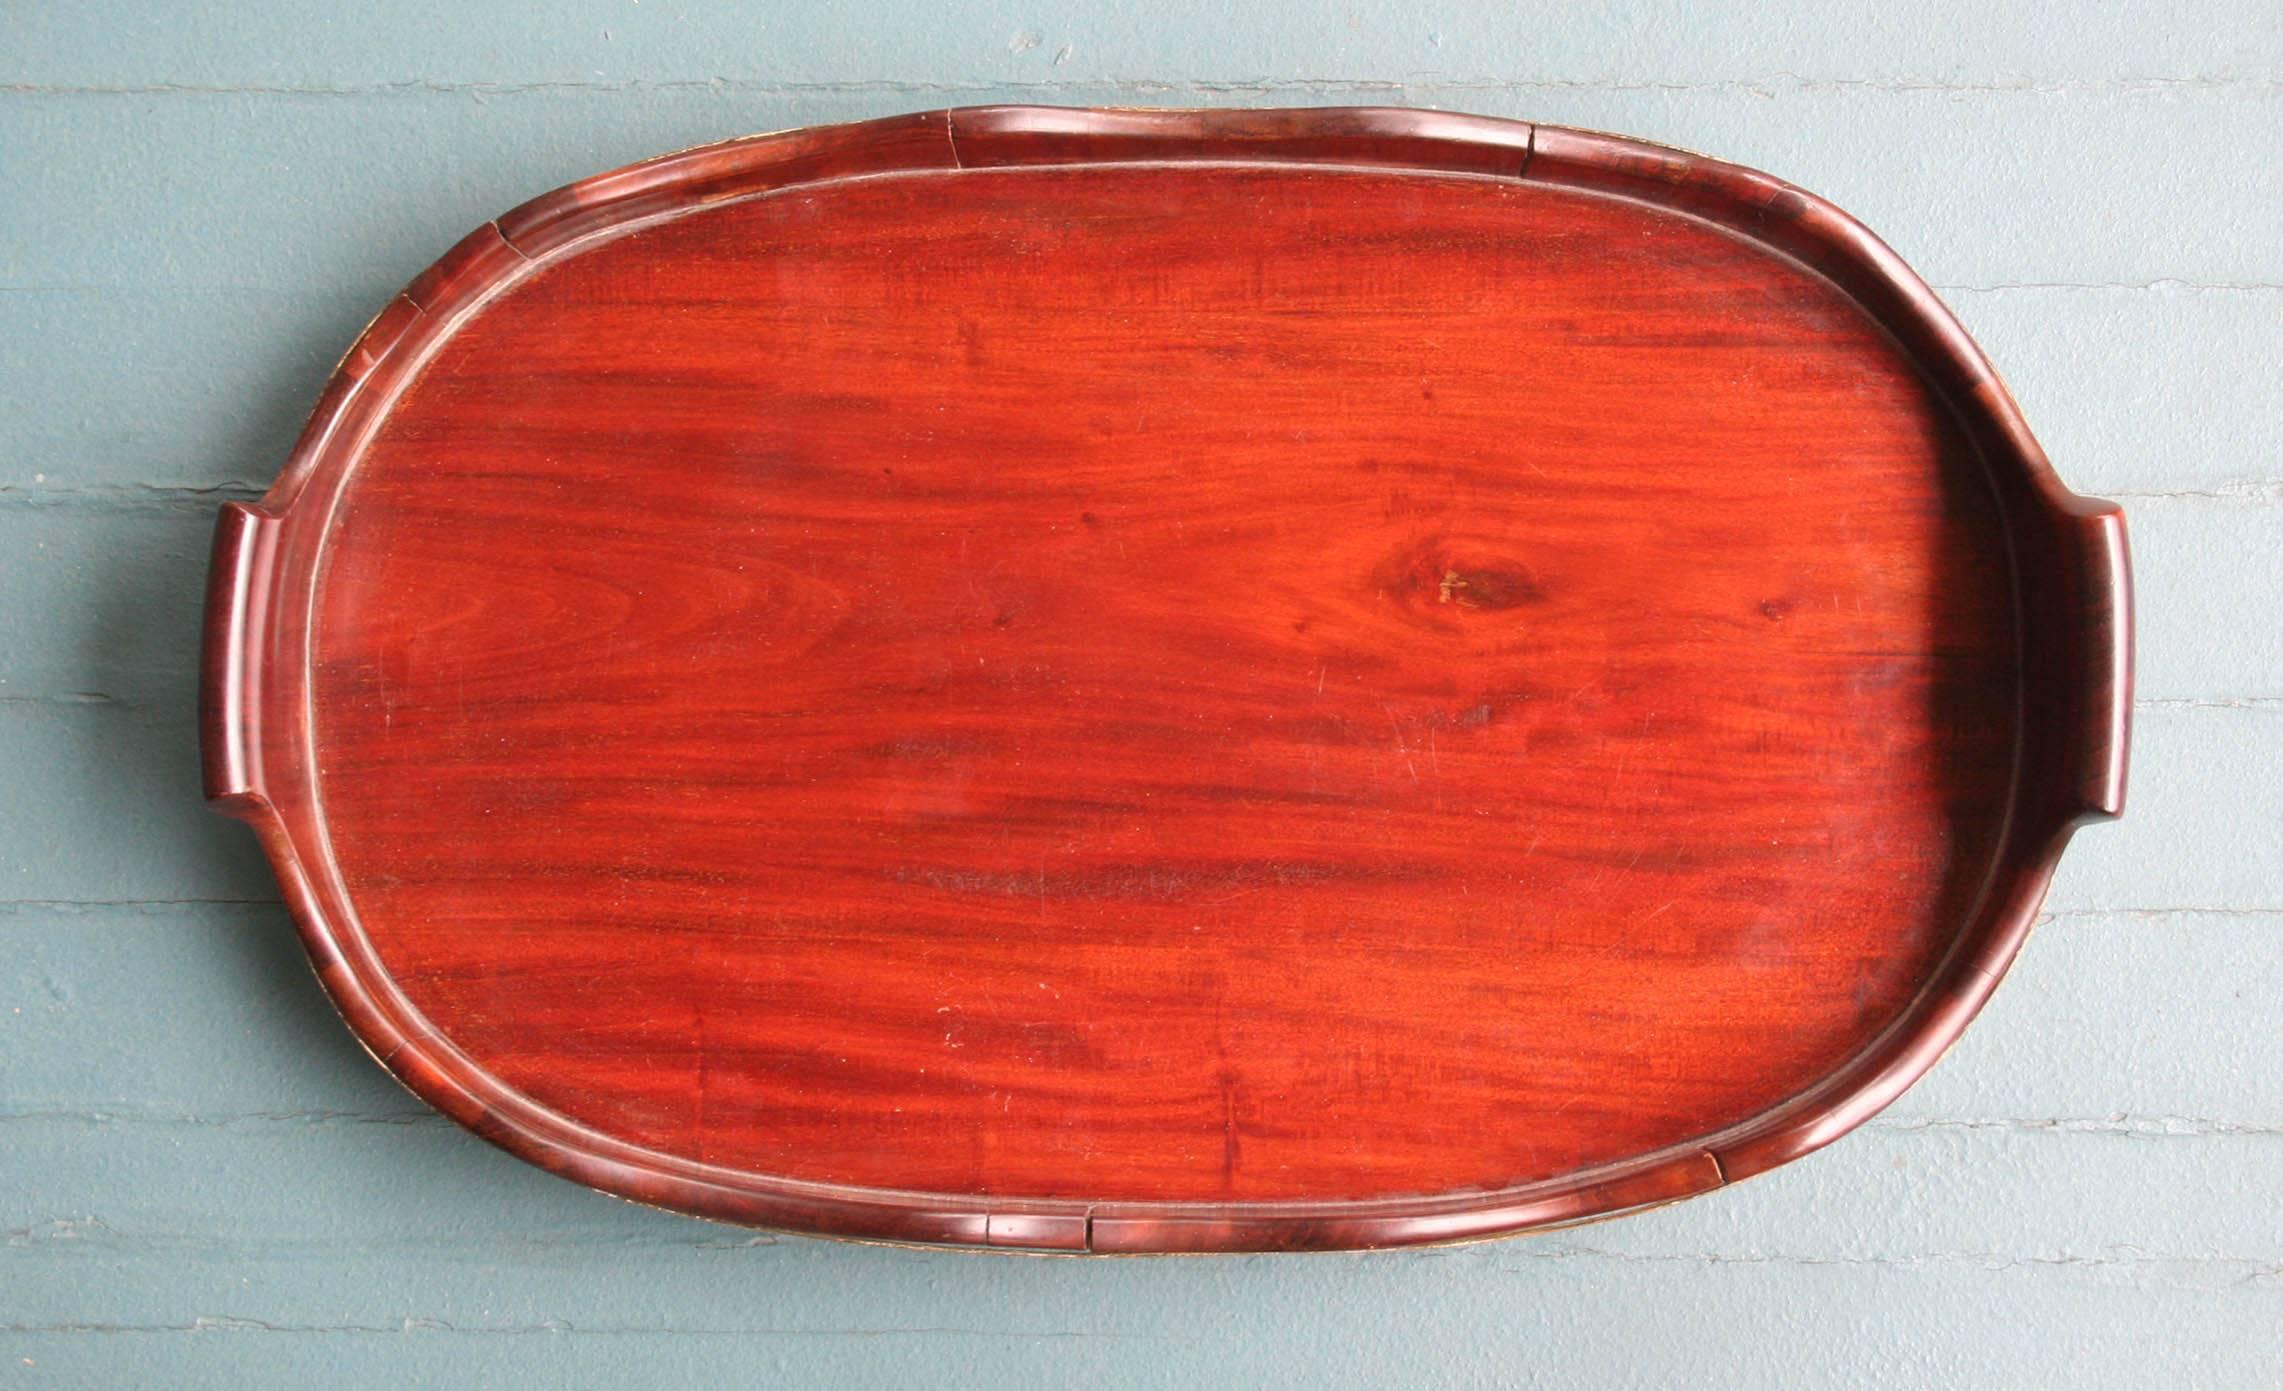 Antique George III oval tray in mahogany having a scalloped edge and staved sides with two brass bands,
English, late18th-early 19th century.
 
Measures: 21.5